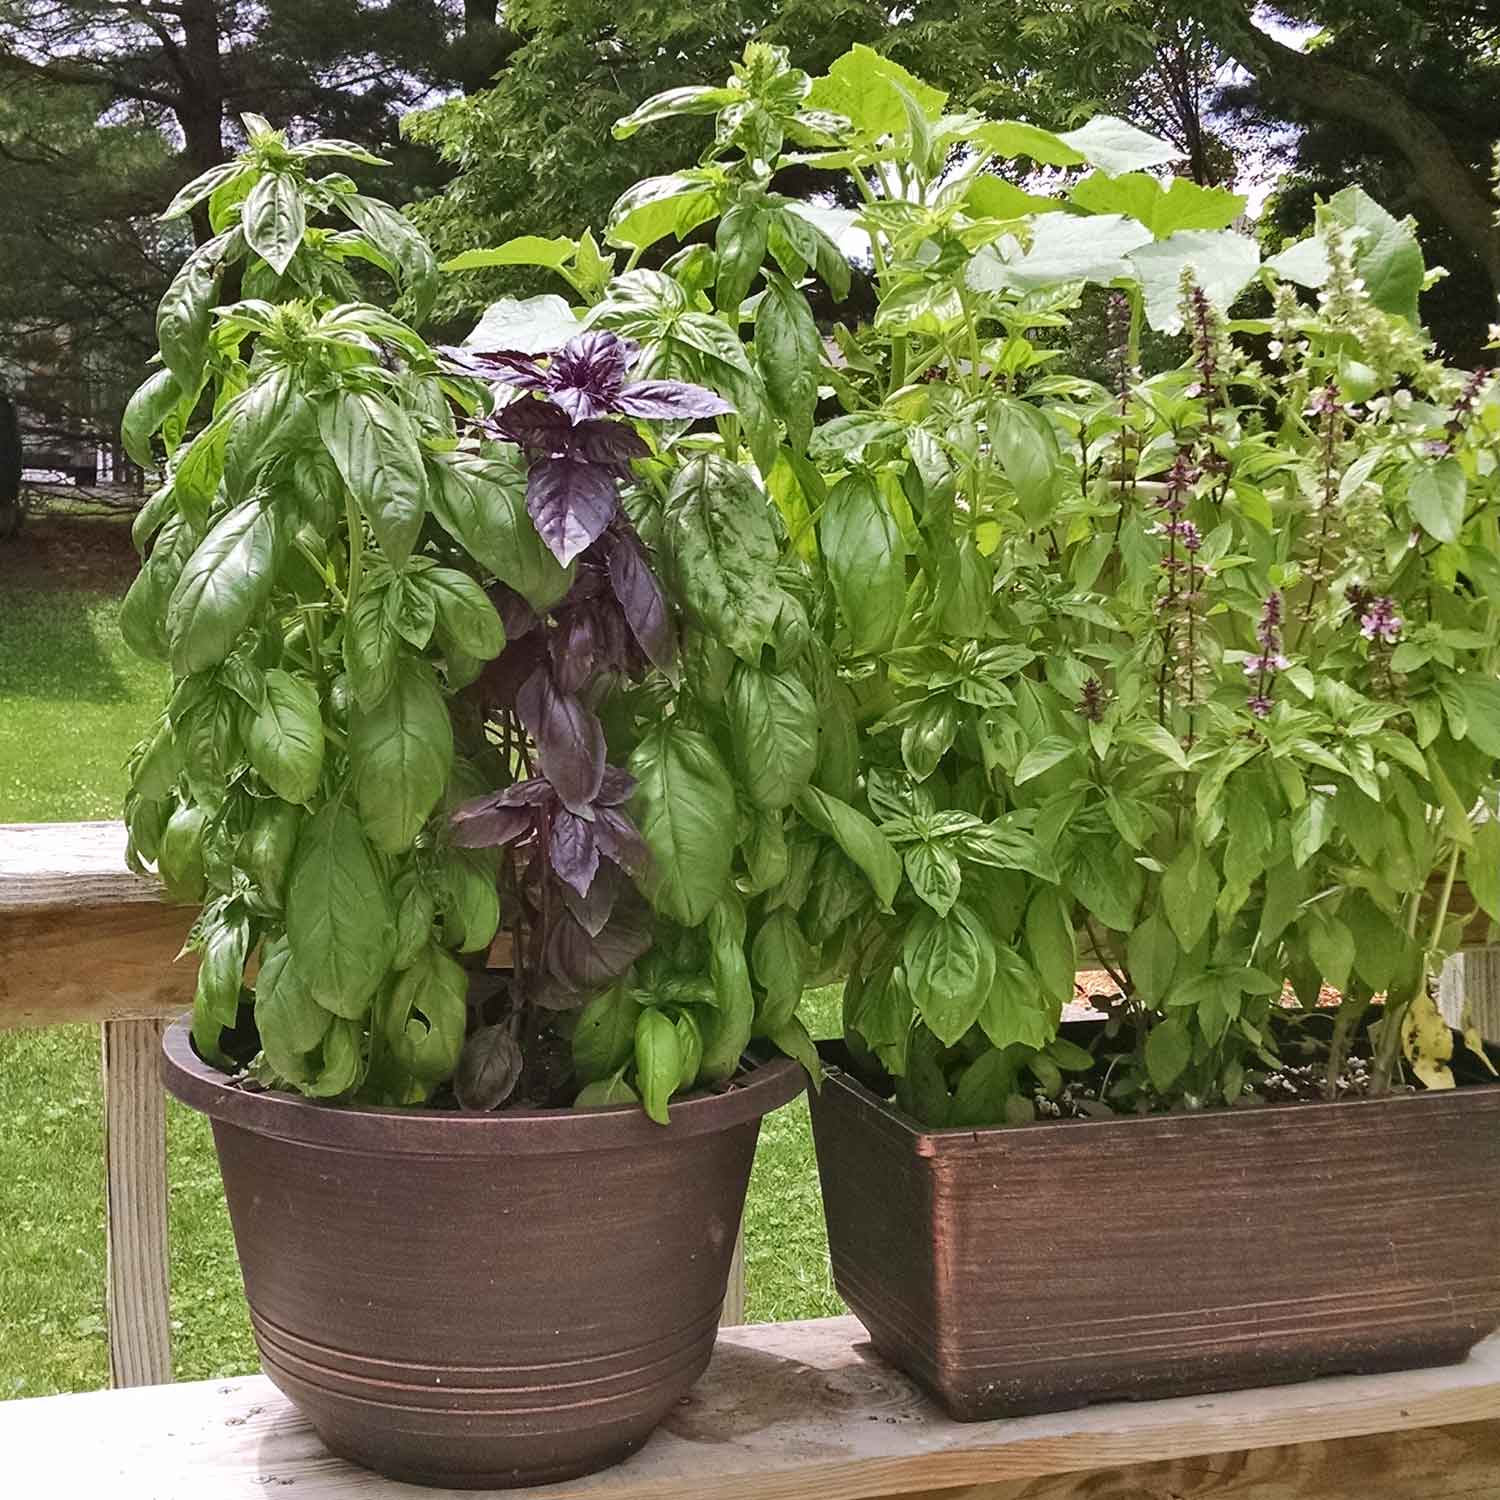 Two planters containing several varieties of basil.